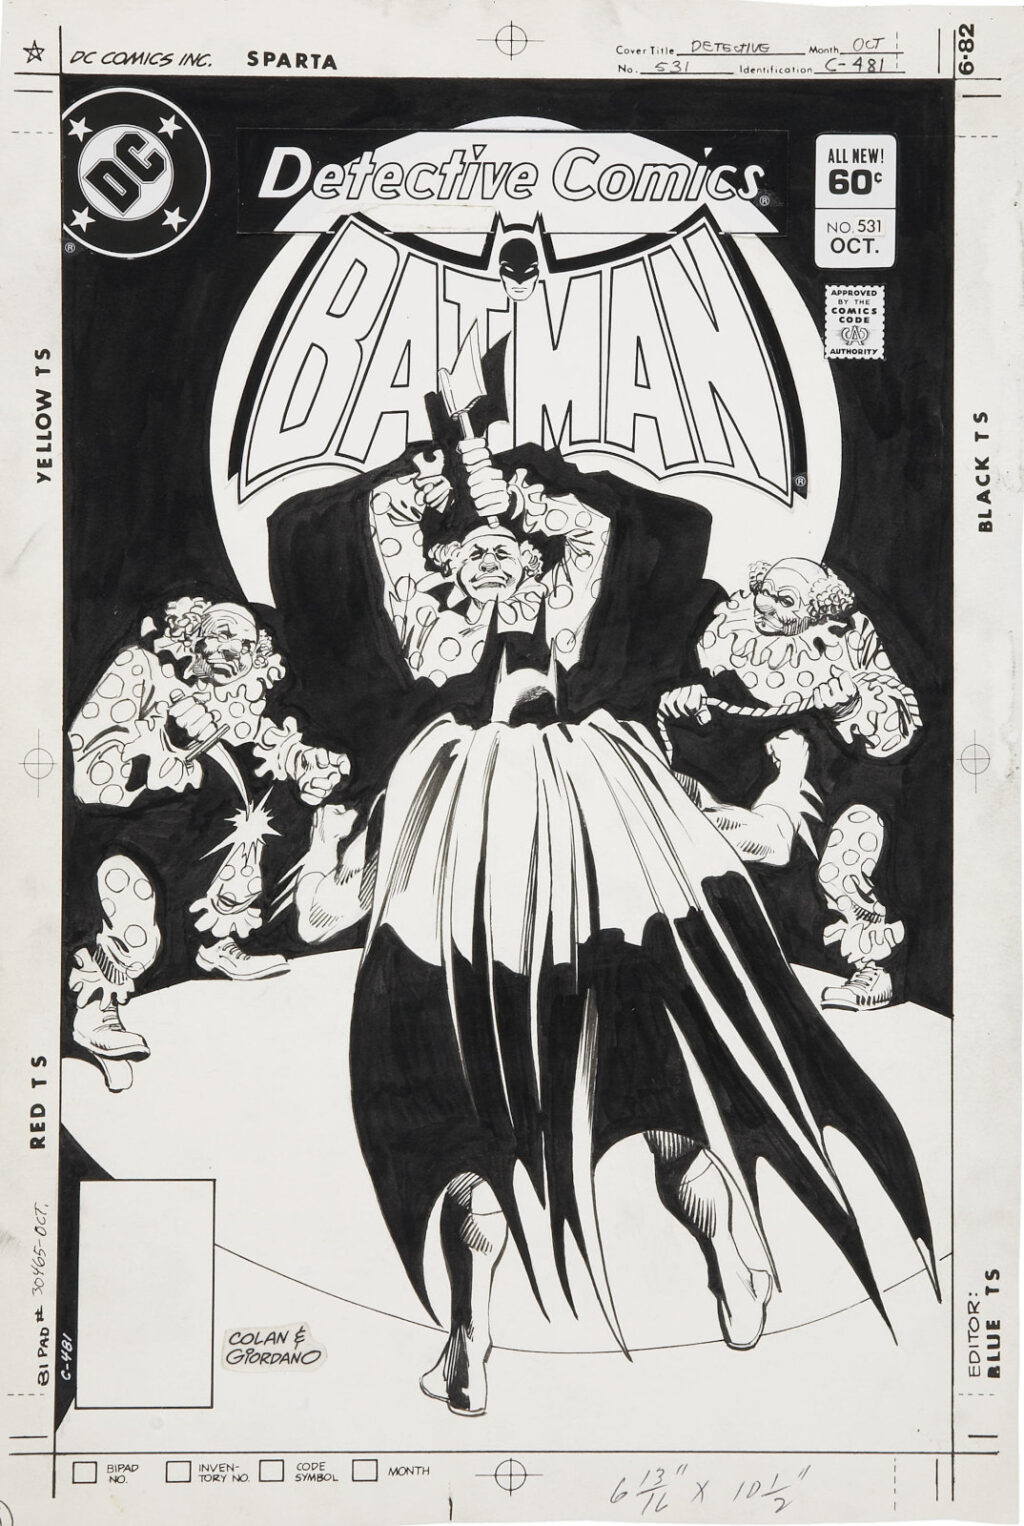 Detective Comics issue 531 cover by Gene Colan and Dick Giordano